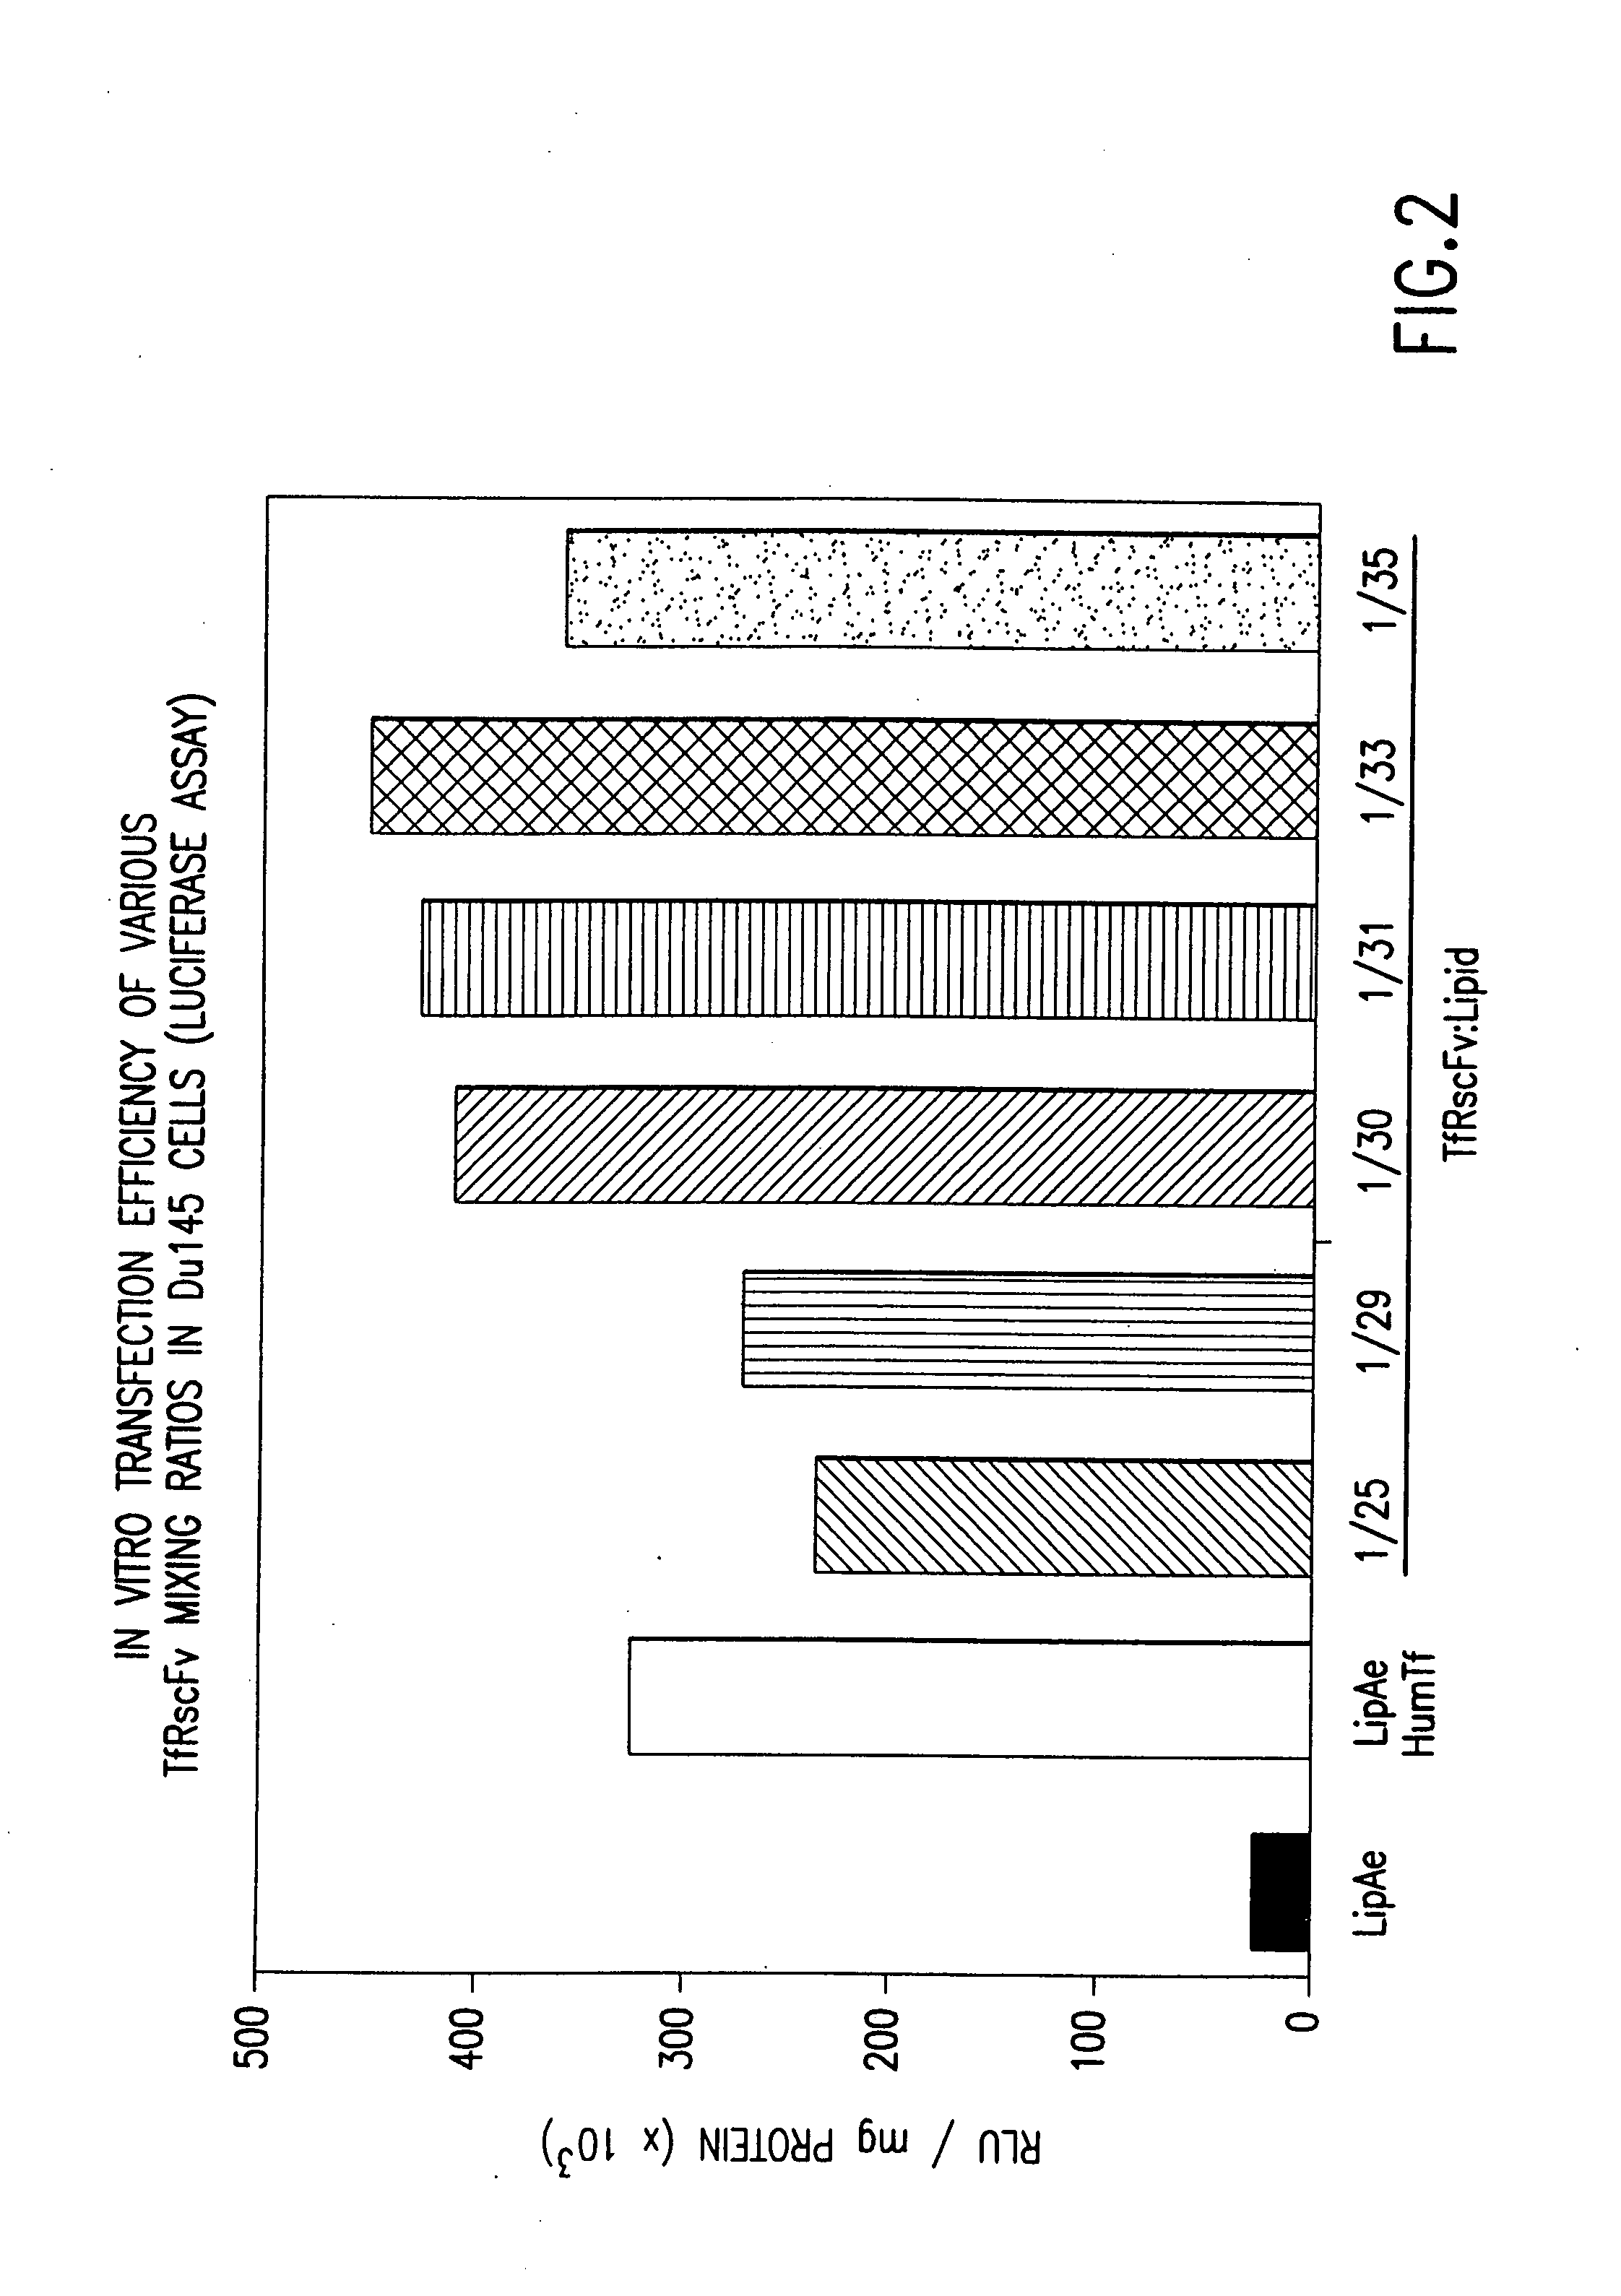 Preparation of antibody or an antibody fragment-targeted immunoliposomes for systemic administration of therapeutic or diagnostic agents and uses thereof